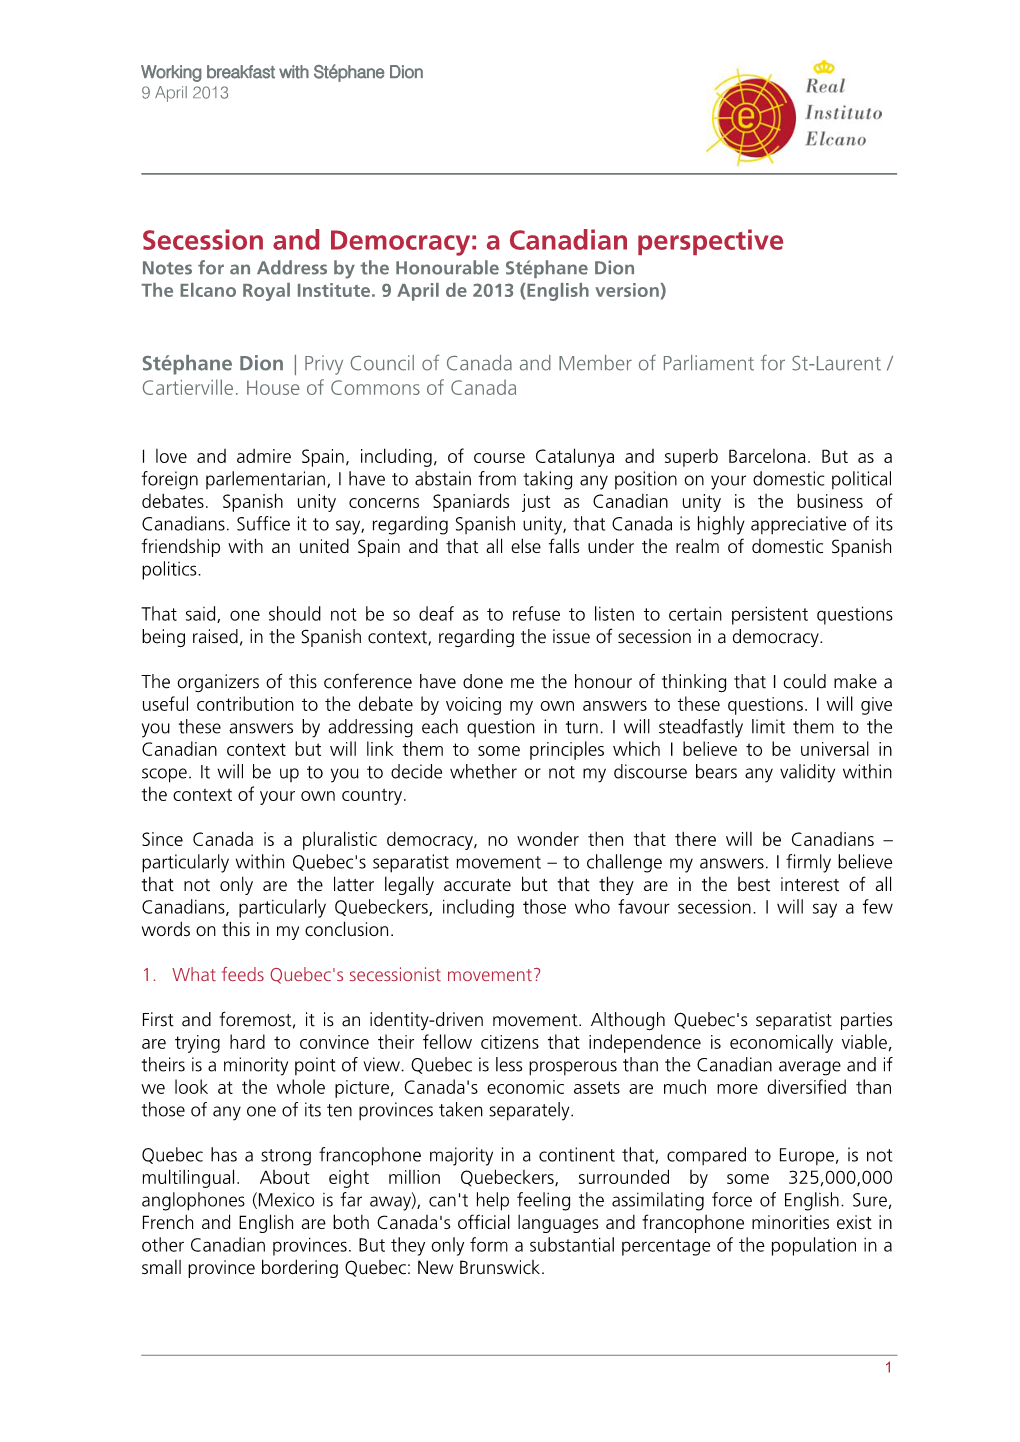 Secession and Democracy: a Canadian Perspective Notes for an Address by the Honourable Stéphane Dion the Elcano Royal Institute